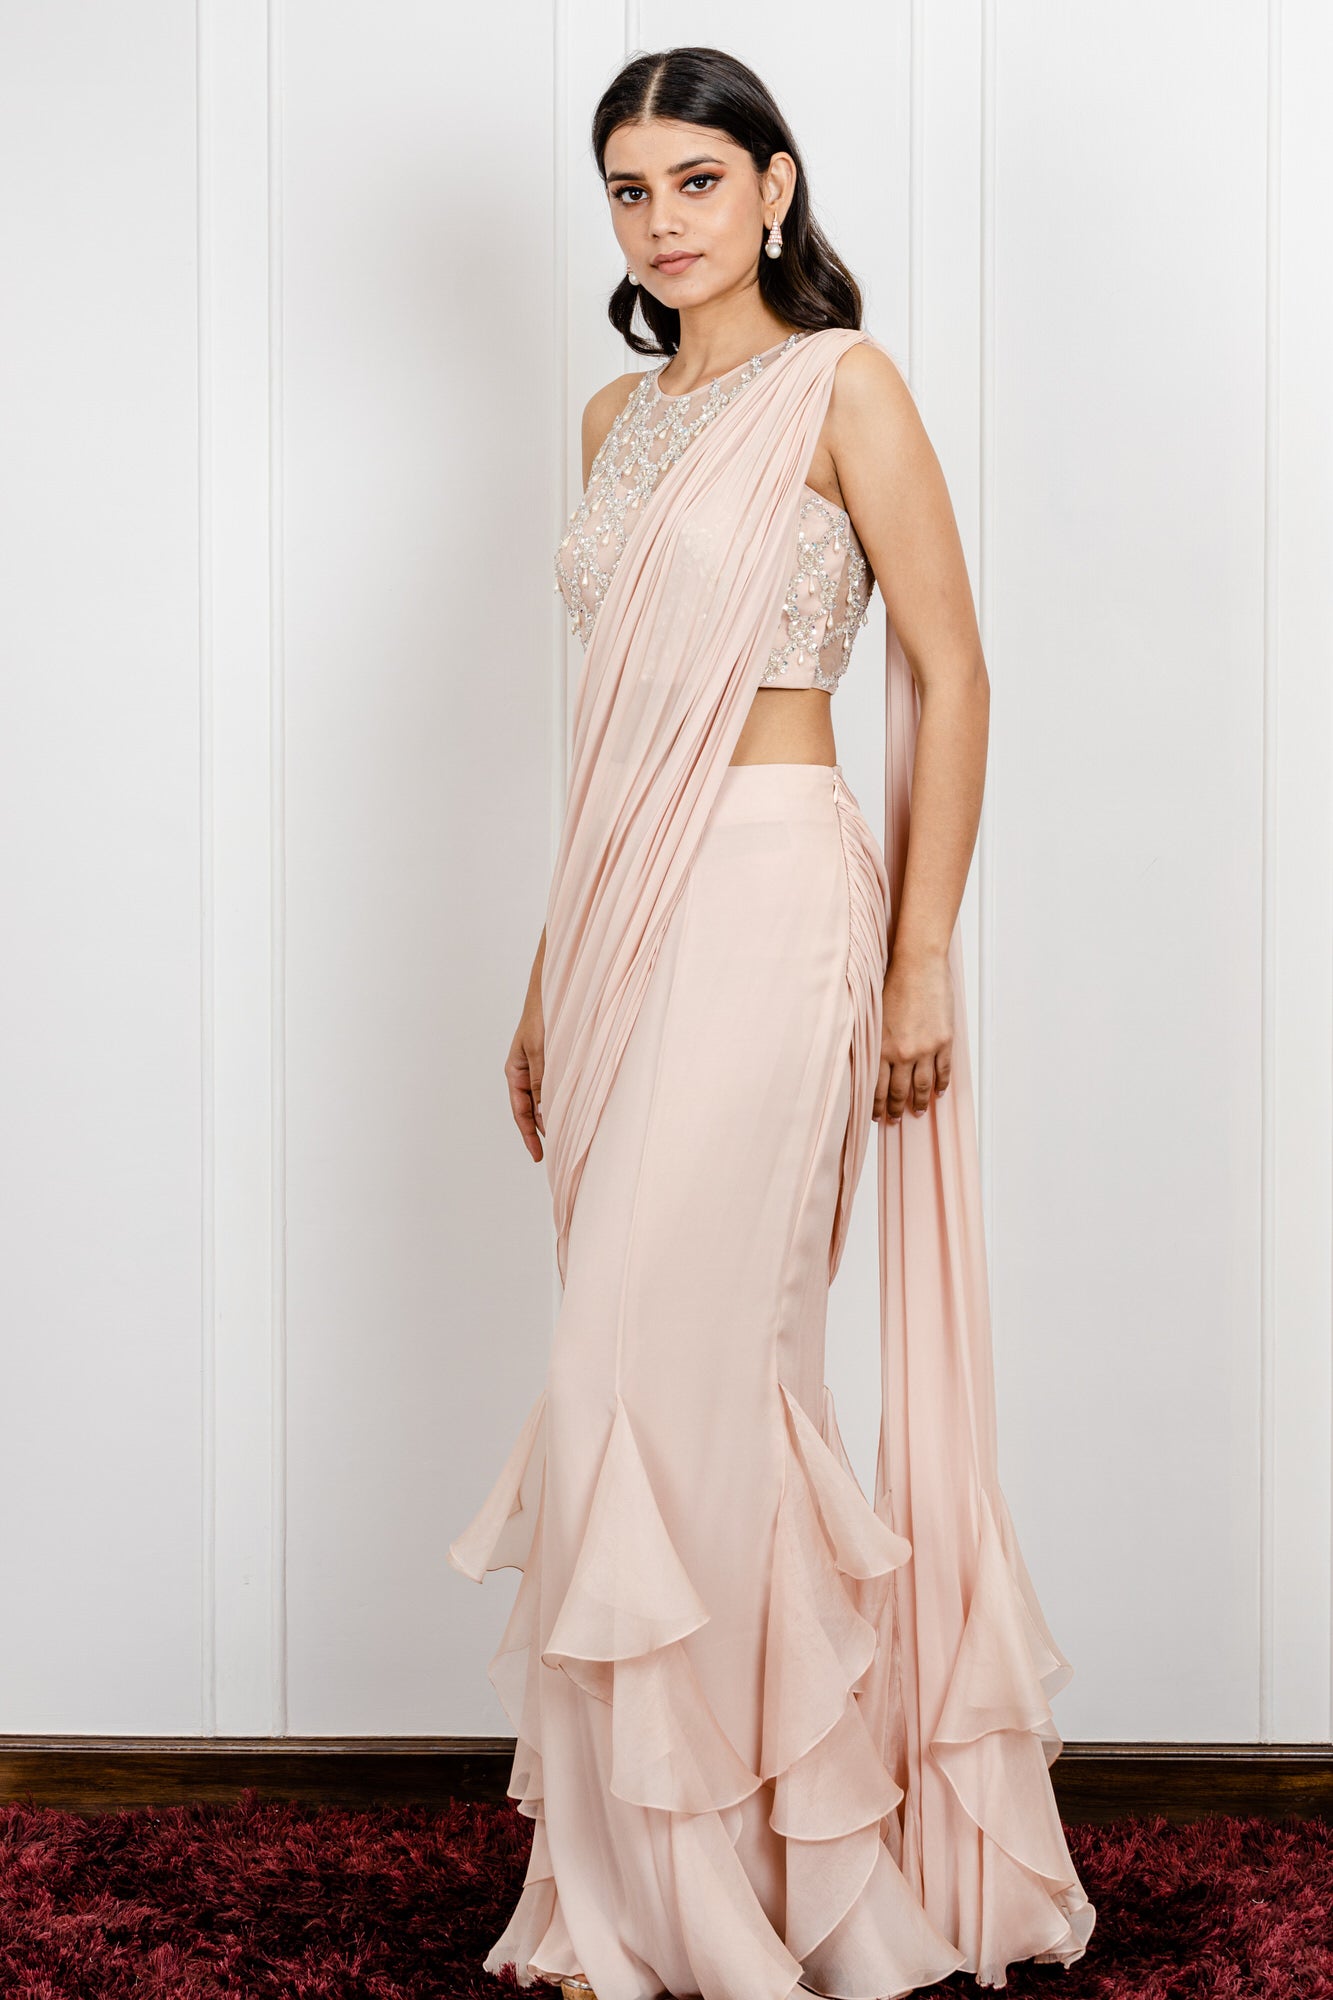 Ruffled Skirt Saree with a Side Drape And a Pearl Dropped Blouse